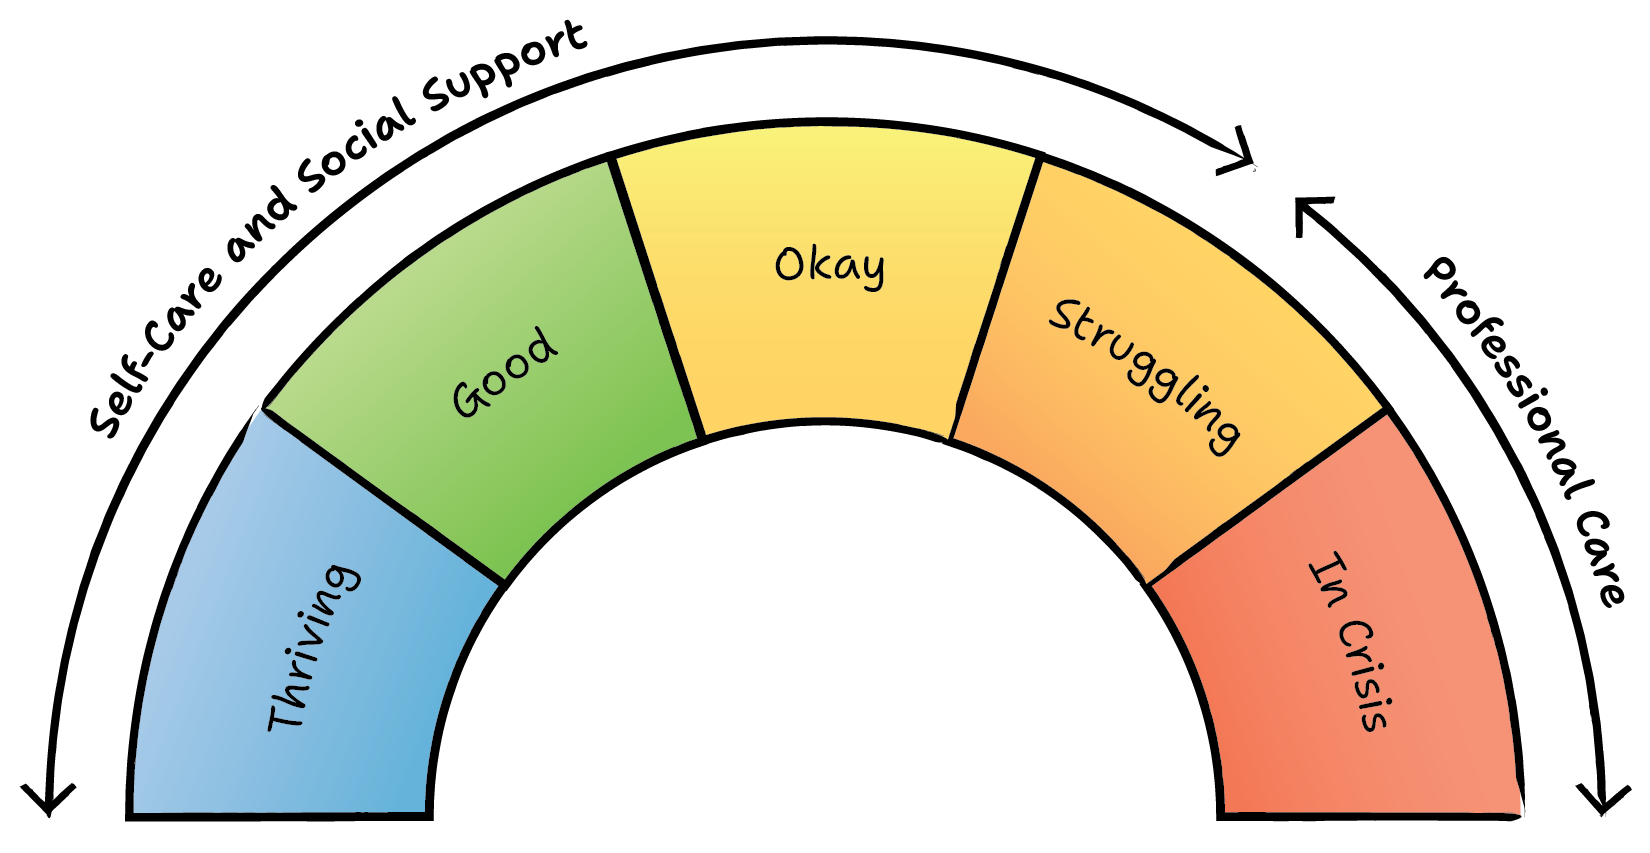 Half-circle meter showing five states of mental health: thriving, good, okay, struggling, and in crisis